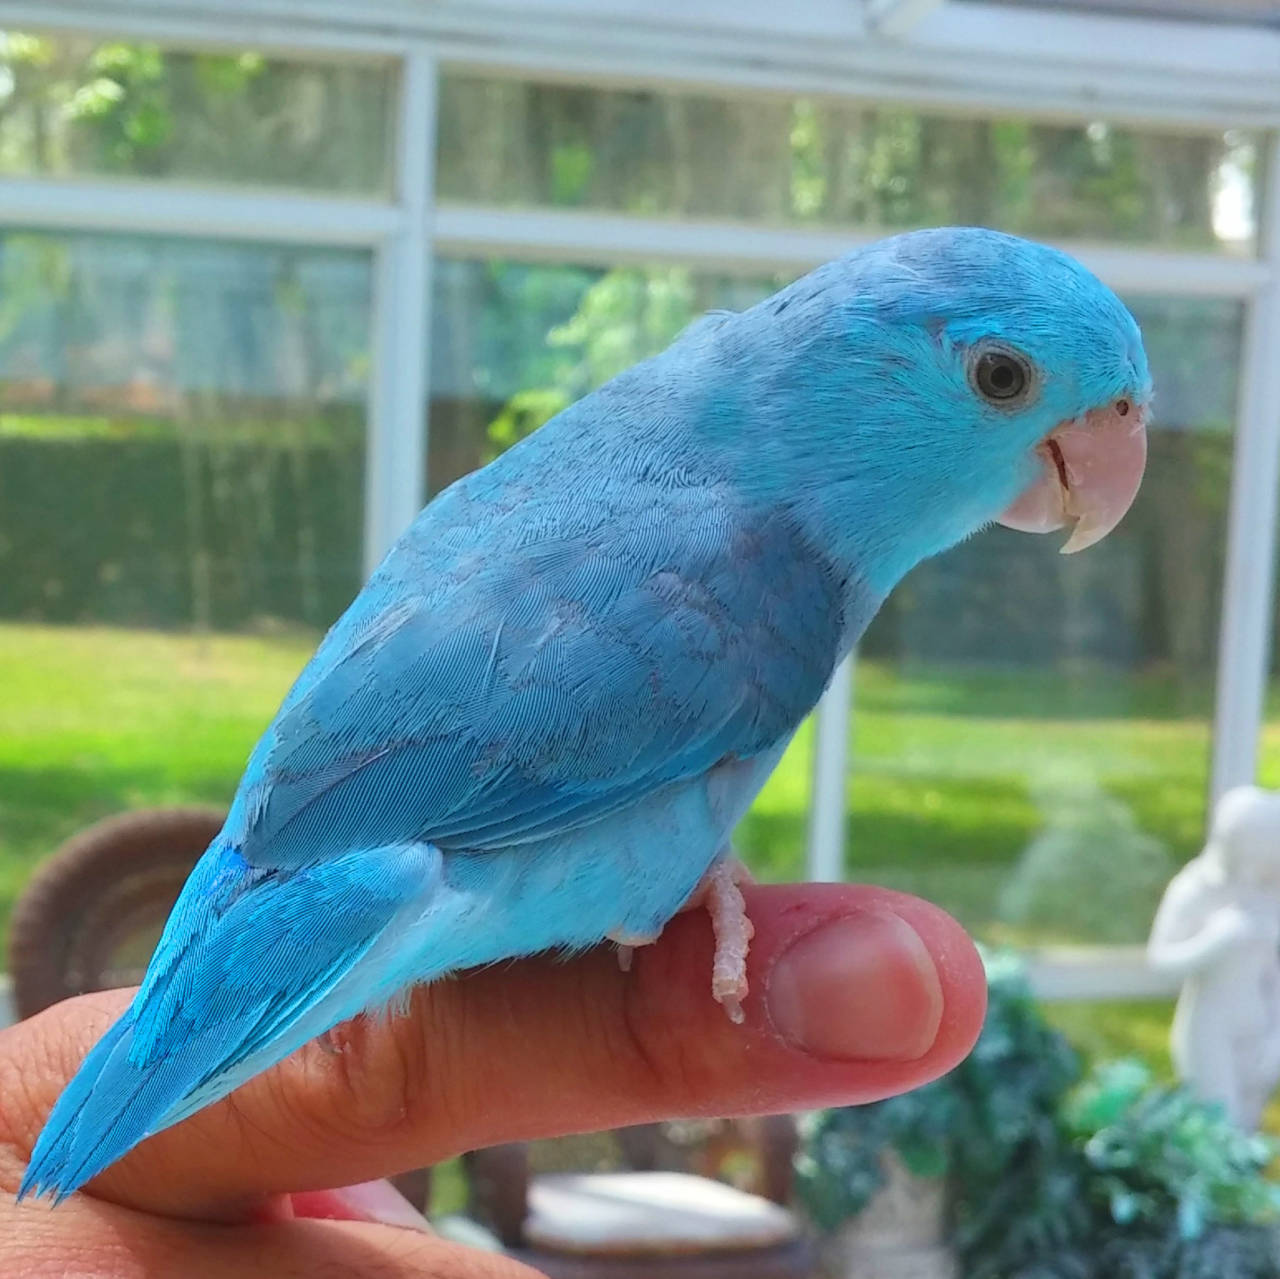 Parrotlet named Small Parrotlet Only 20g And Small Box